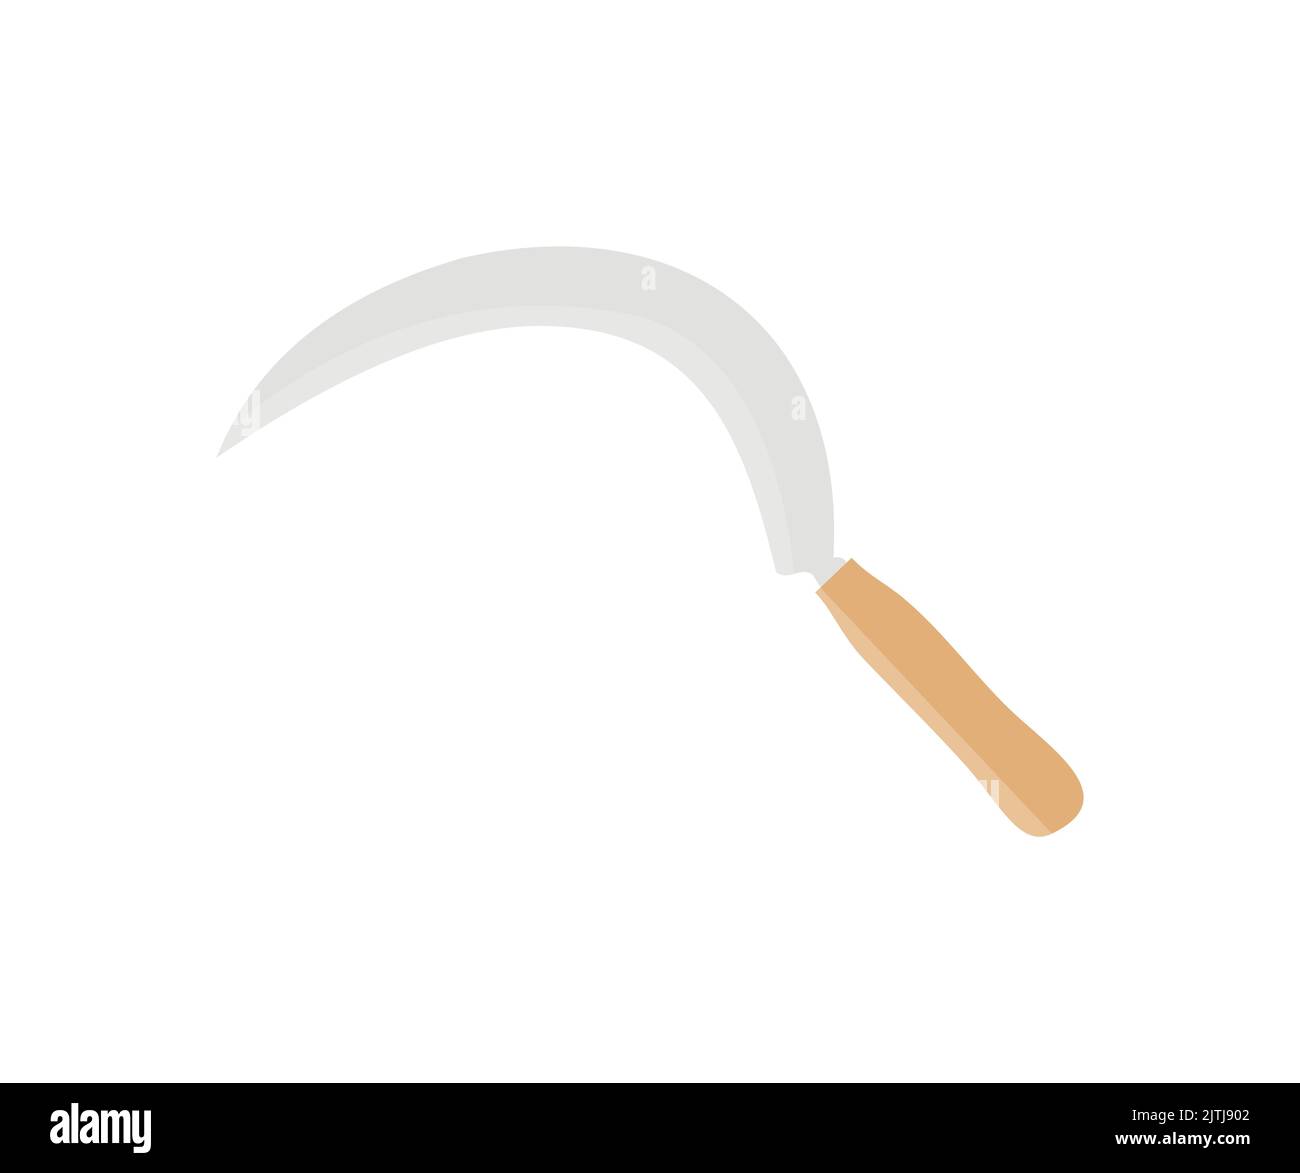 Sickle with wooden handle logo design. Agricultural tool, use for getting rid of grass or weeds in paddy field or gardens, use for harvesting. Stock Vector